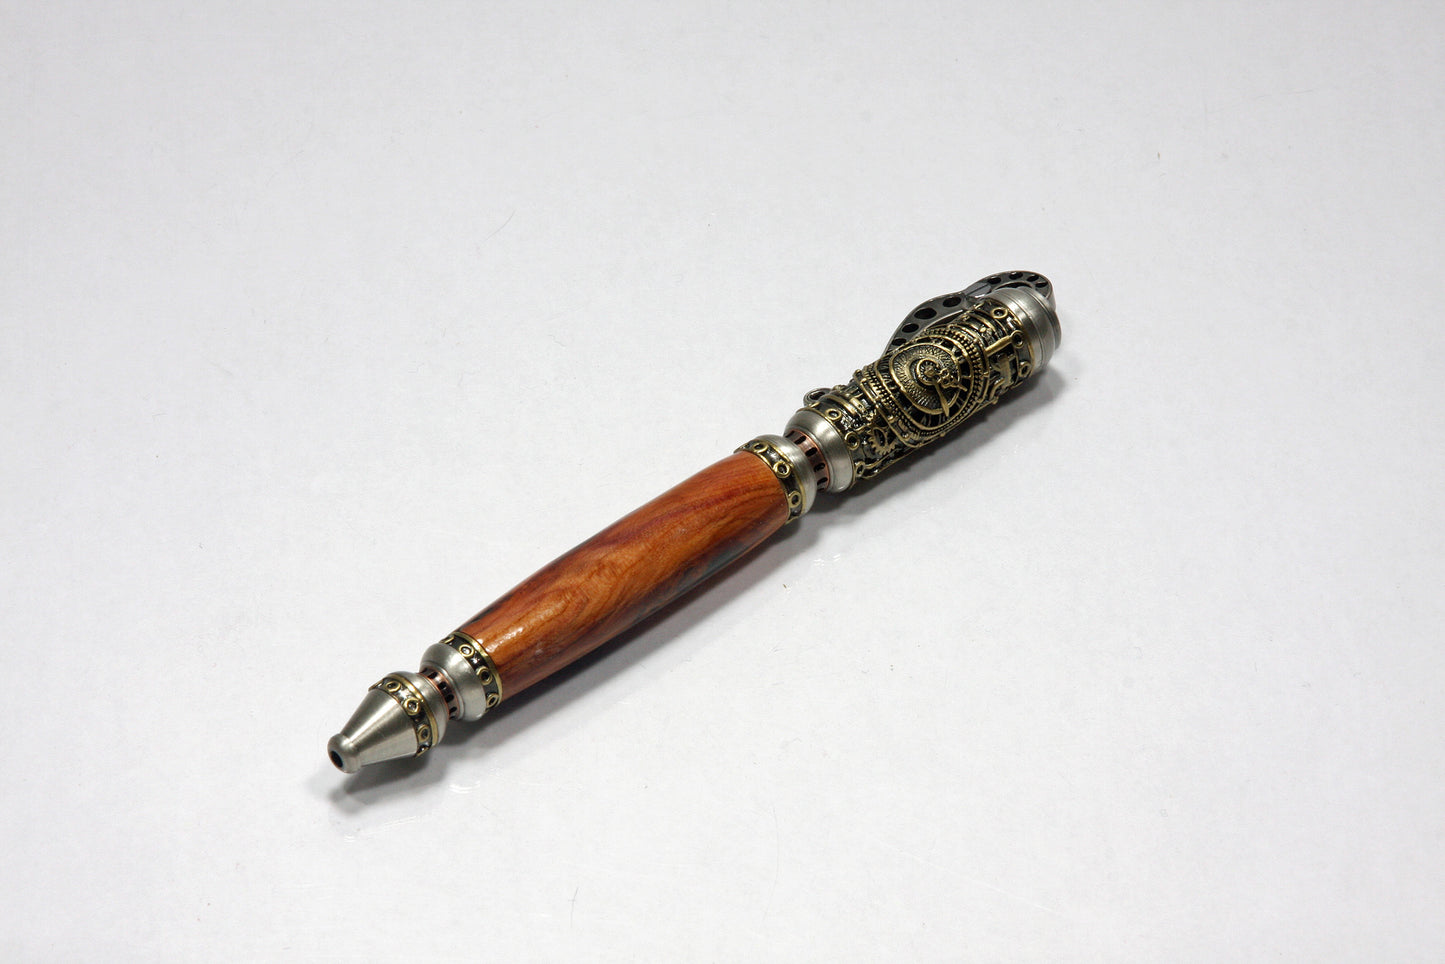 Elegant Dr. Who Steampunk Ballpoint Pen with Yew Wood Barrel